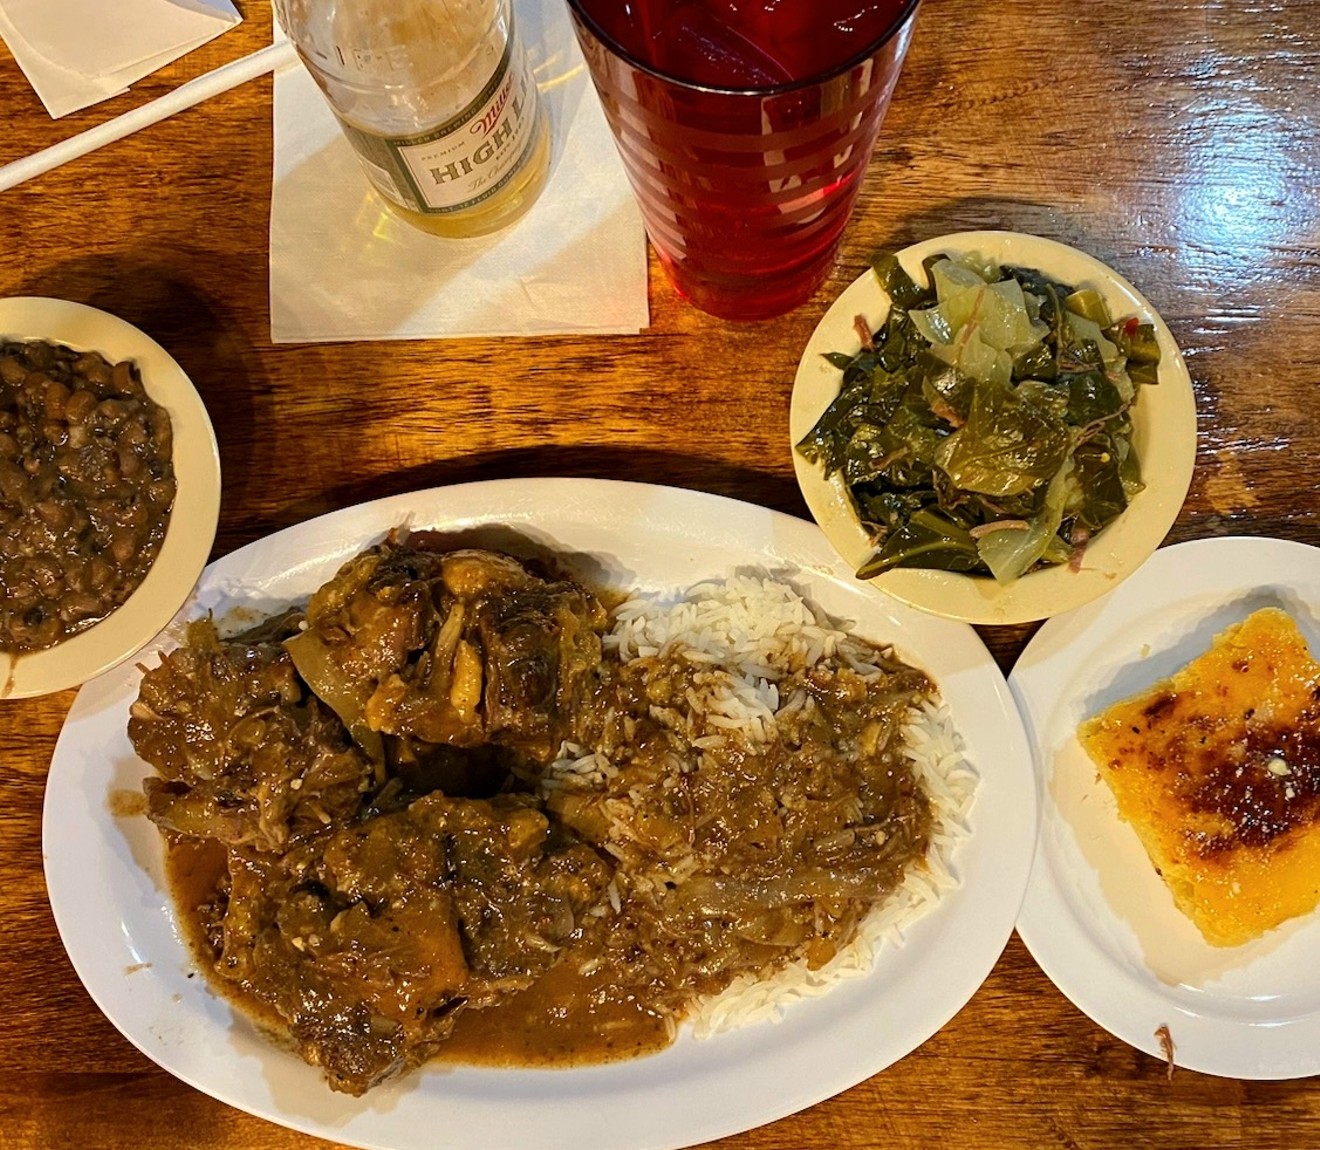 Blazing Chicken Shack serves up a perfectly seasoned oxtail-and-rice special, but it's only available on Thursdays, Fridays and Saturdays.